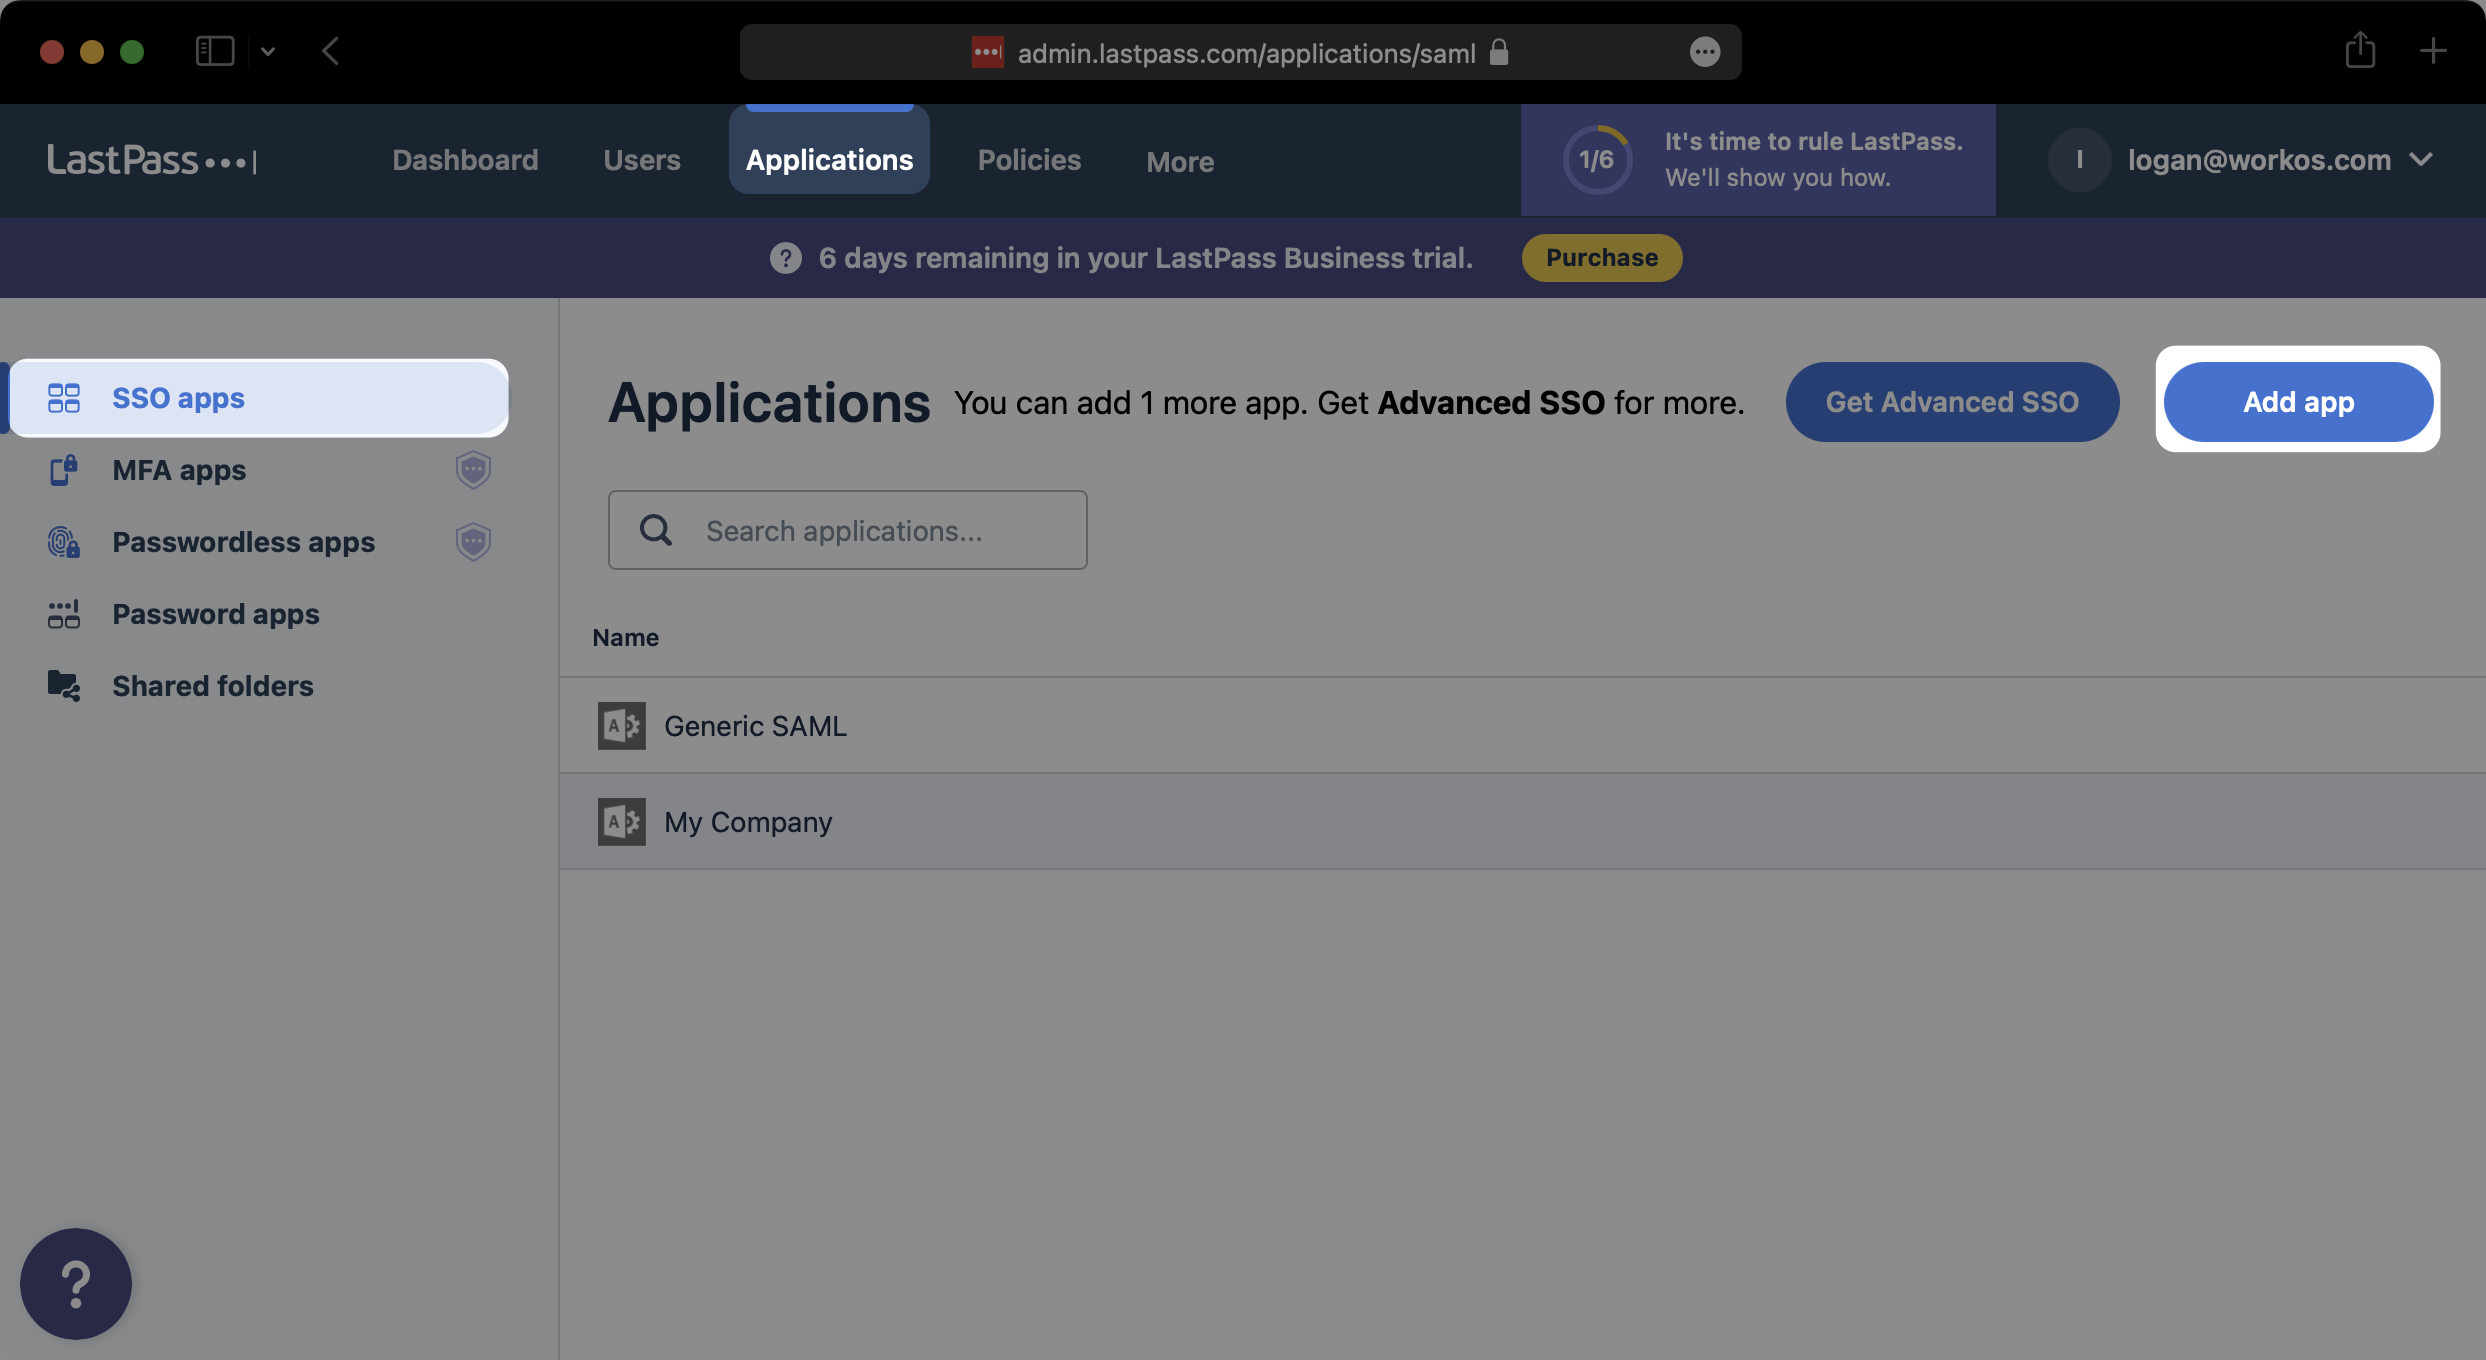 Select or Create App in LastPass